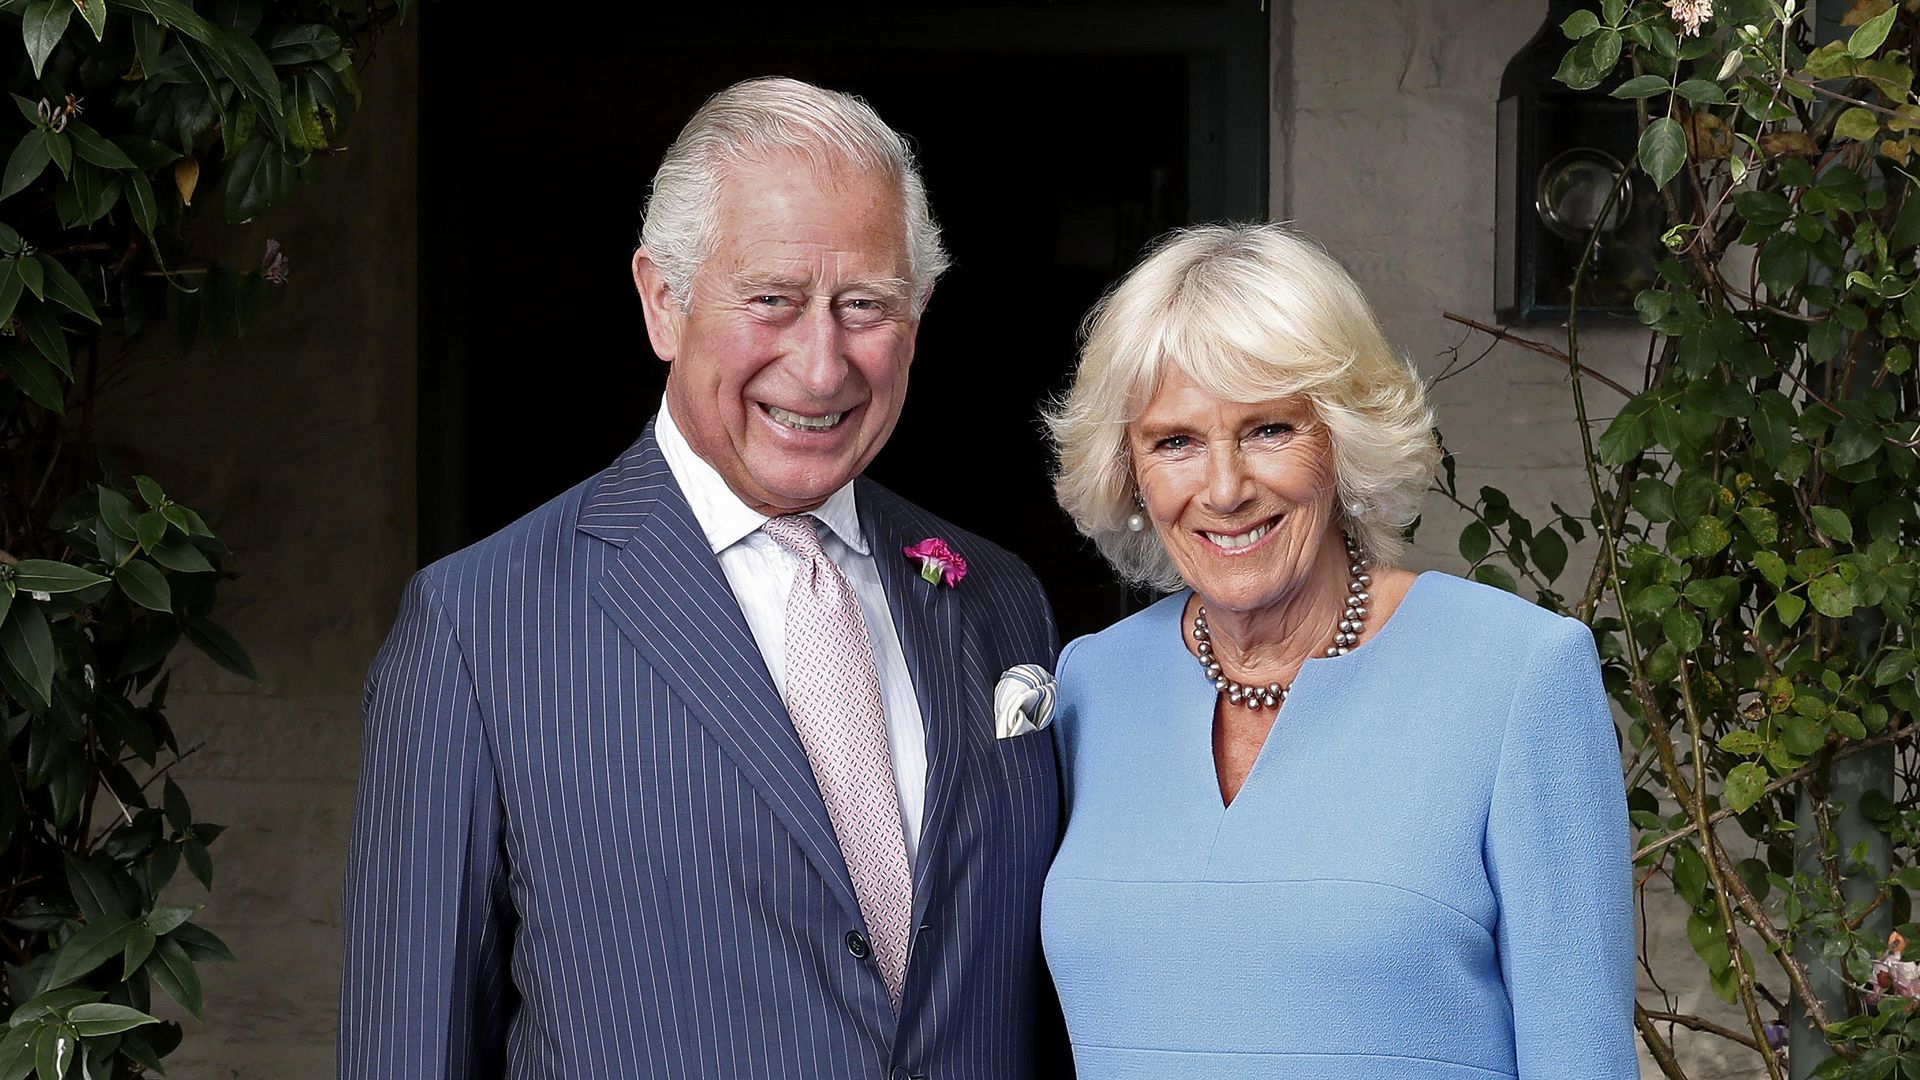 New Portraits Of The Prince Of Wales & Duchess Of Cornwall To Mark 50th Anniversary Of The Investiture & To Celebrate Wales Week 2019